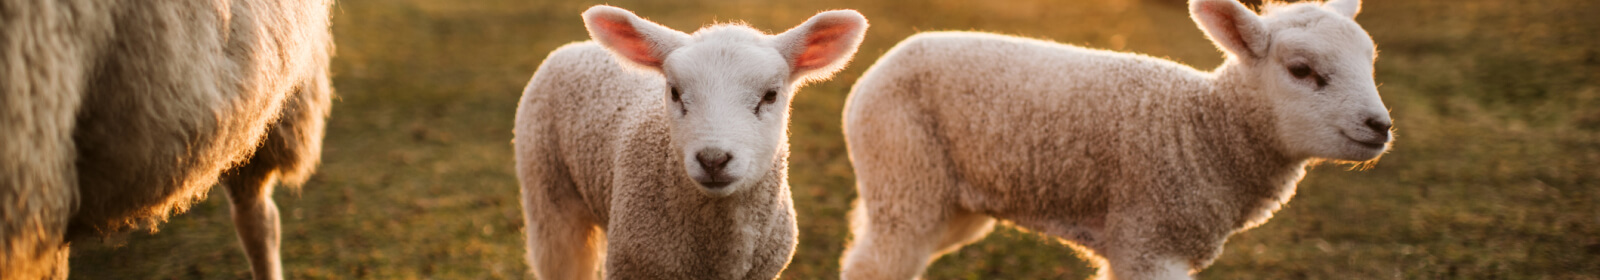 Two young lambs in a field